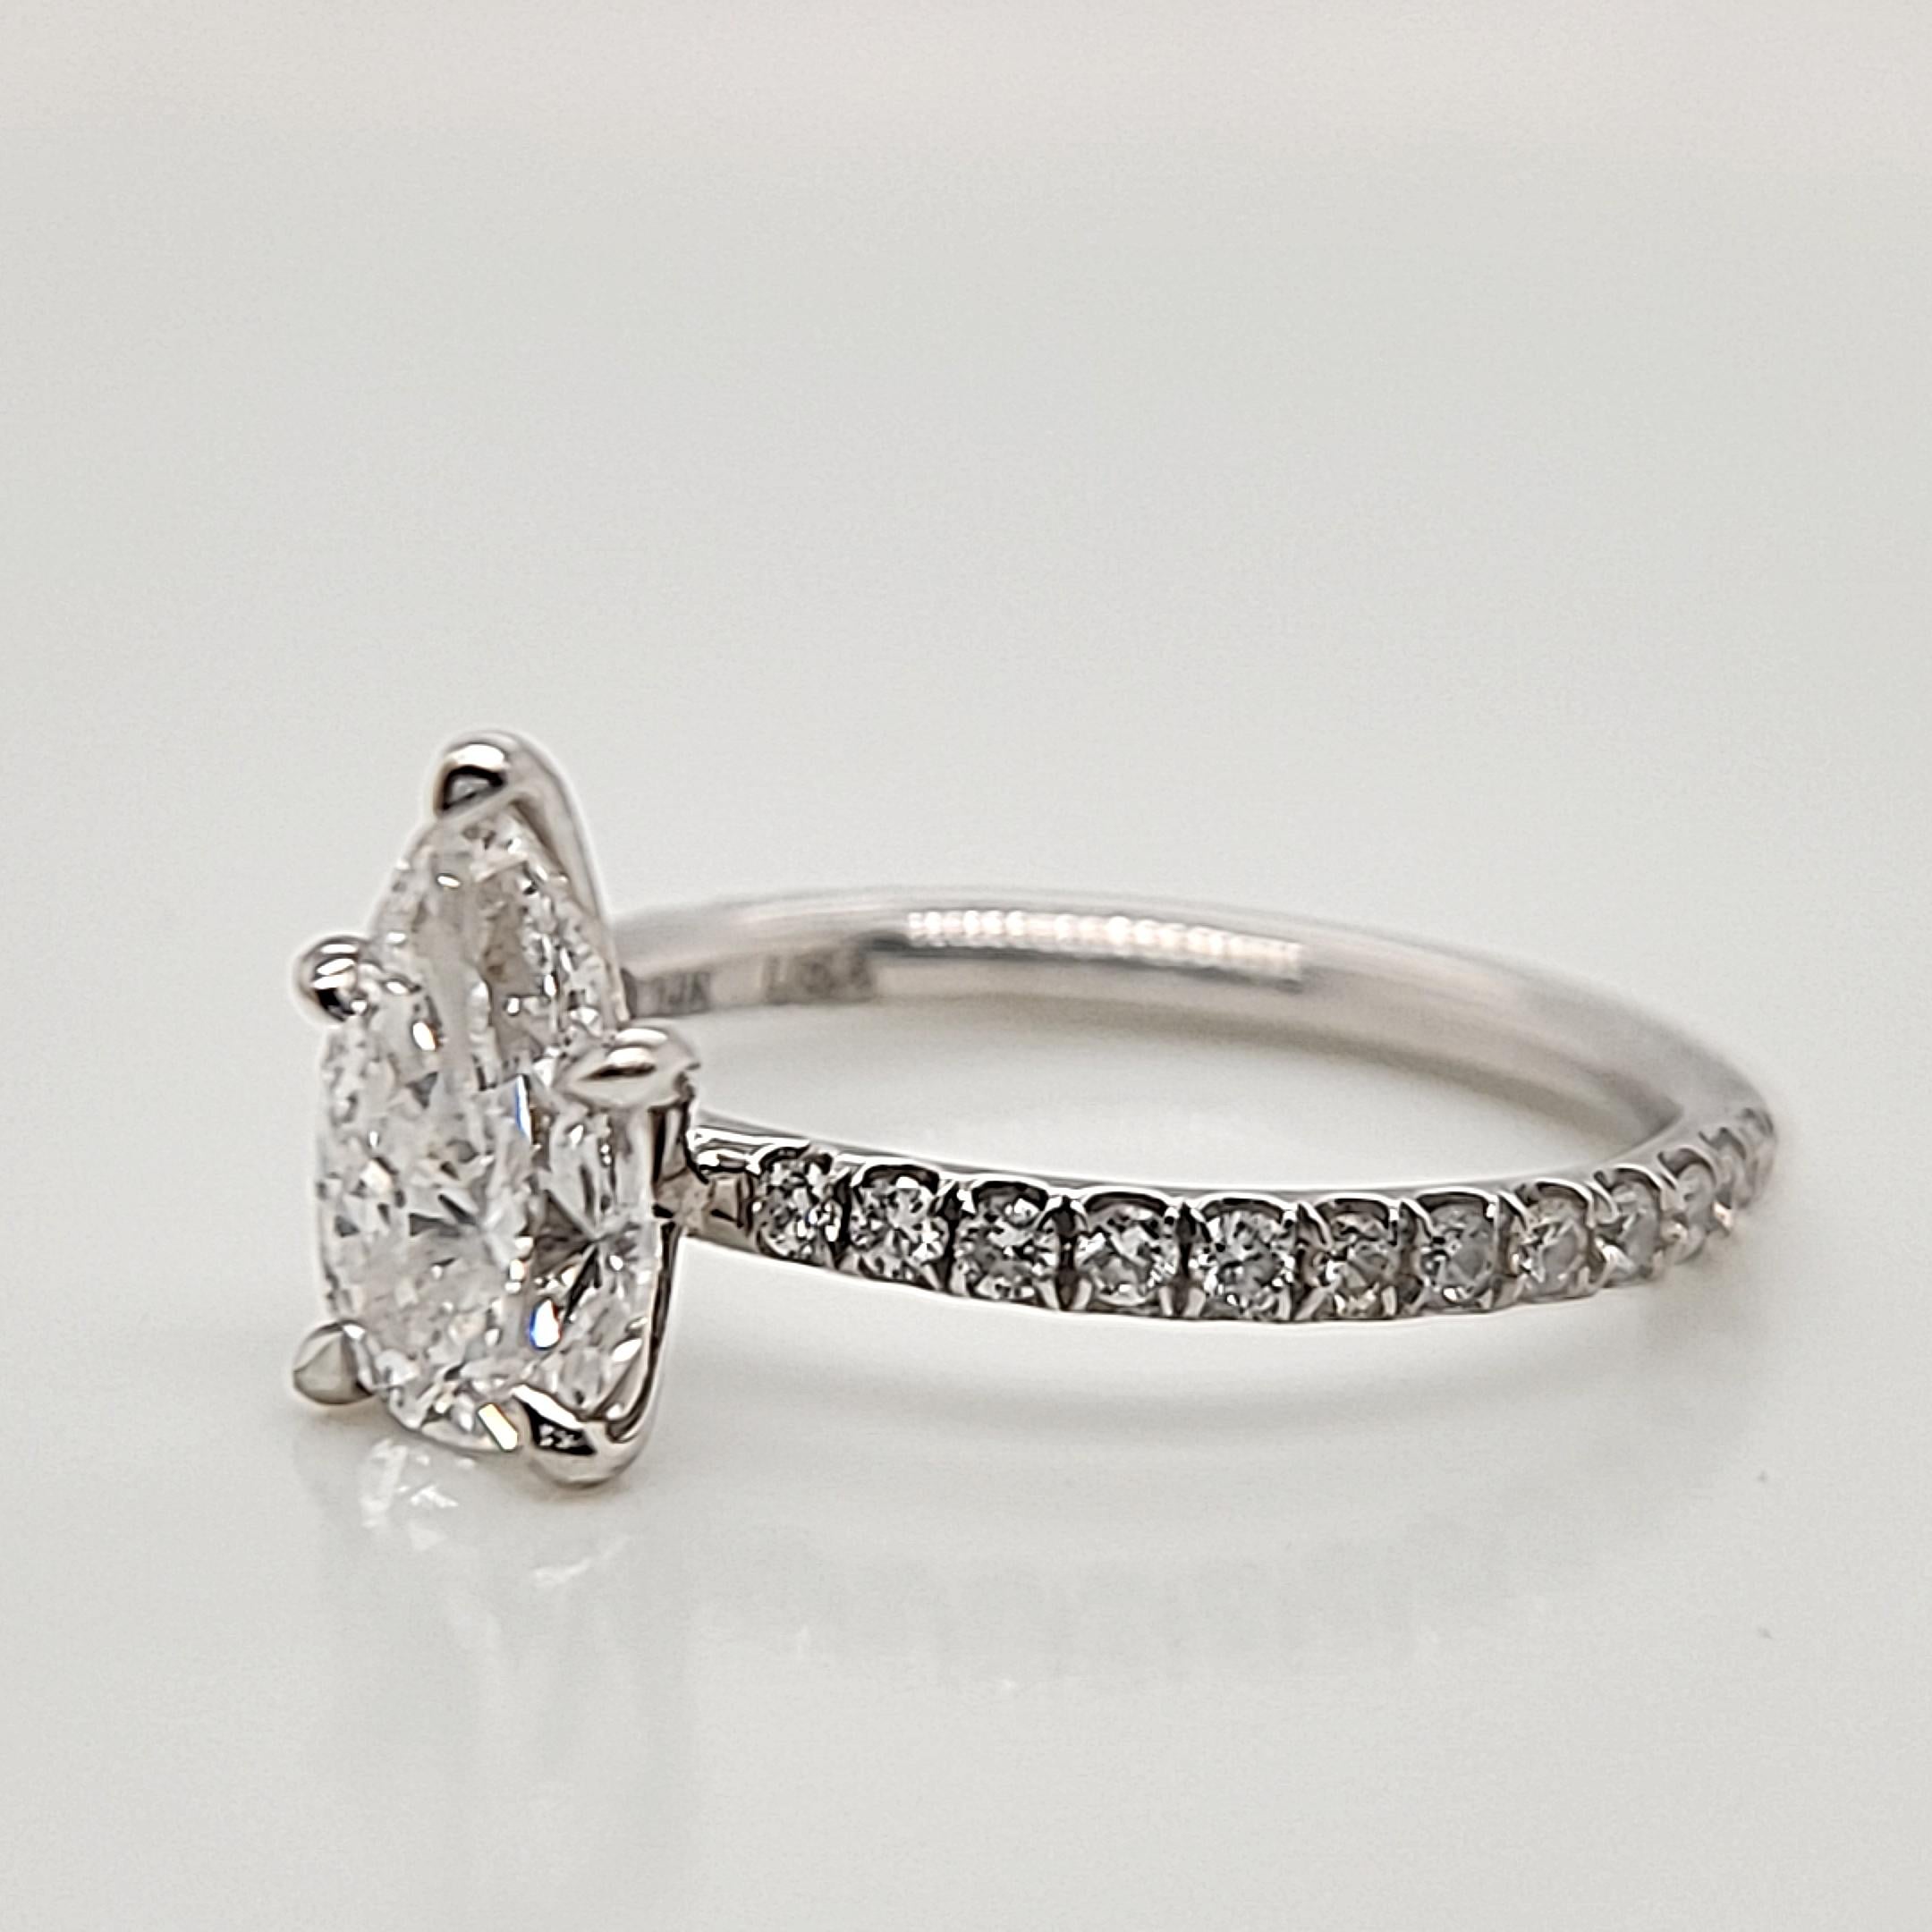 Elevate your style with the exquisite craftsmanship of the handmade 14k white gold Tiffany Nova 